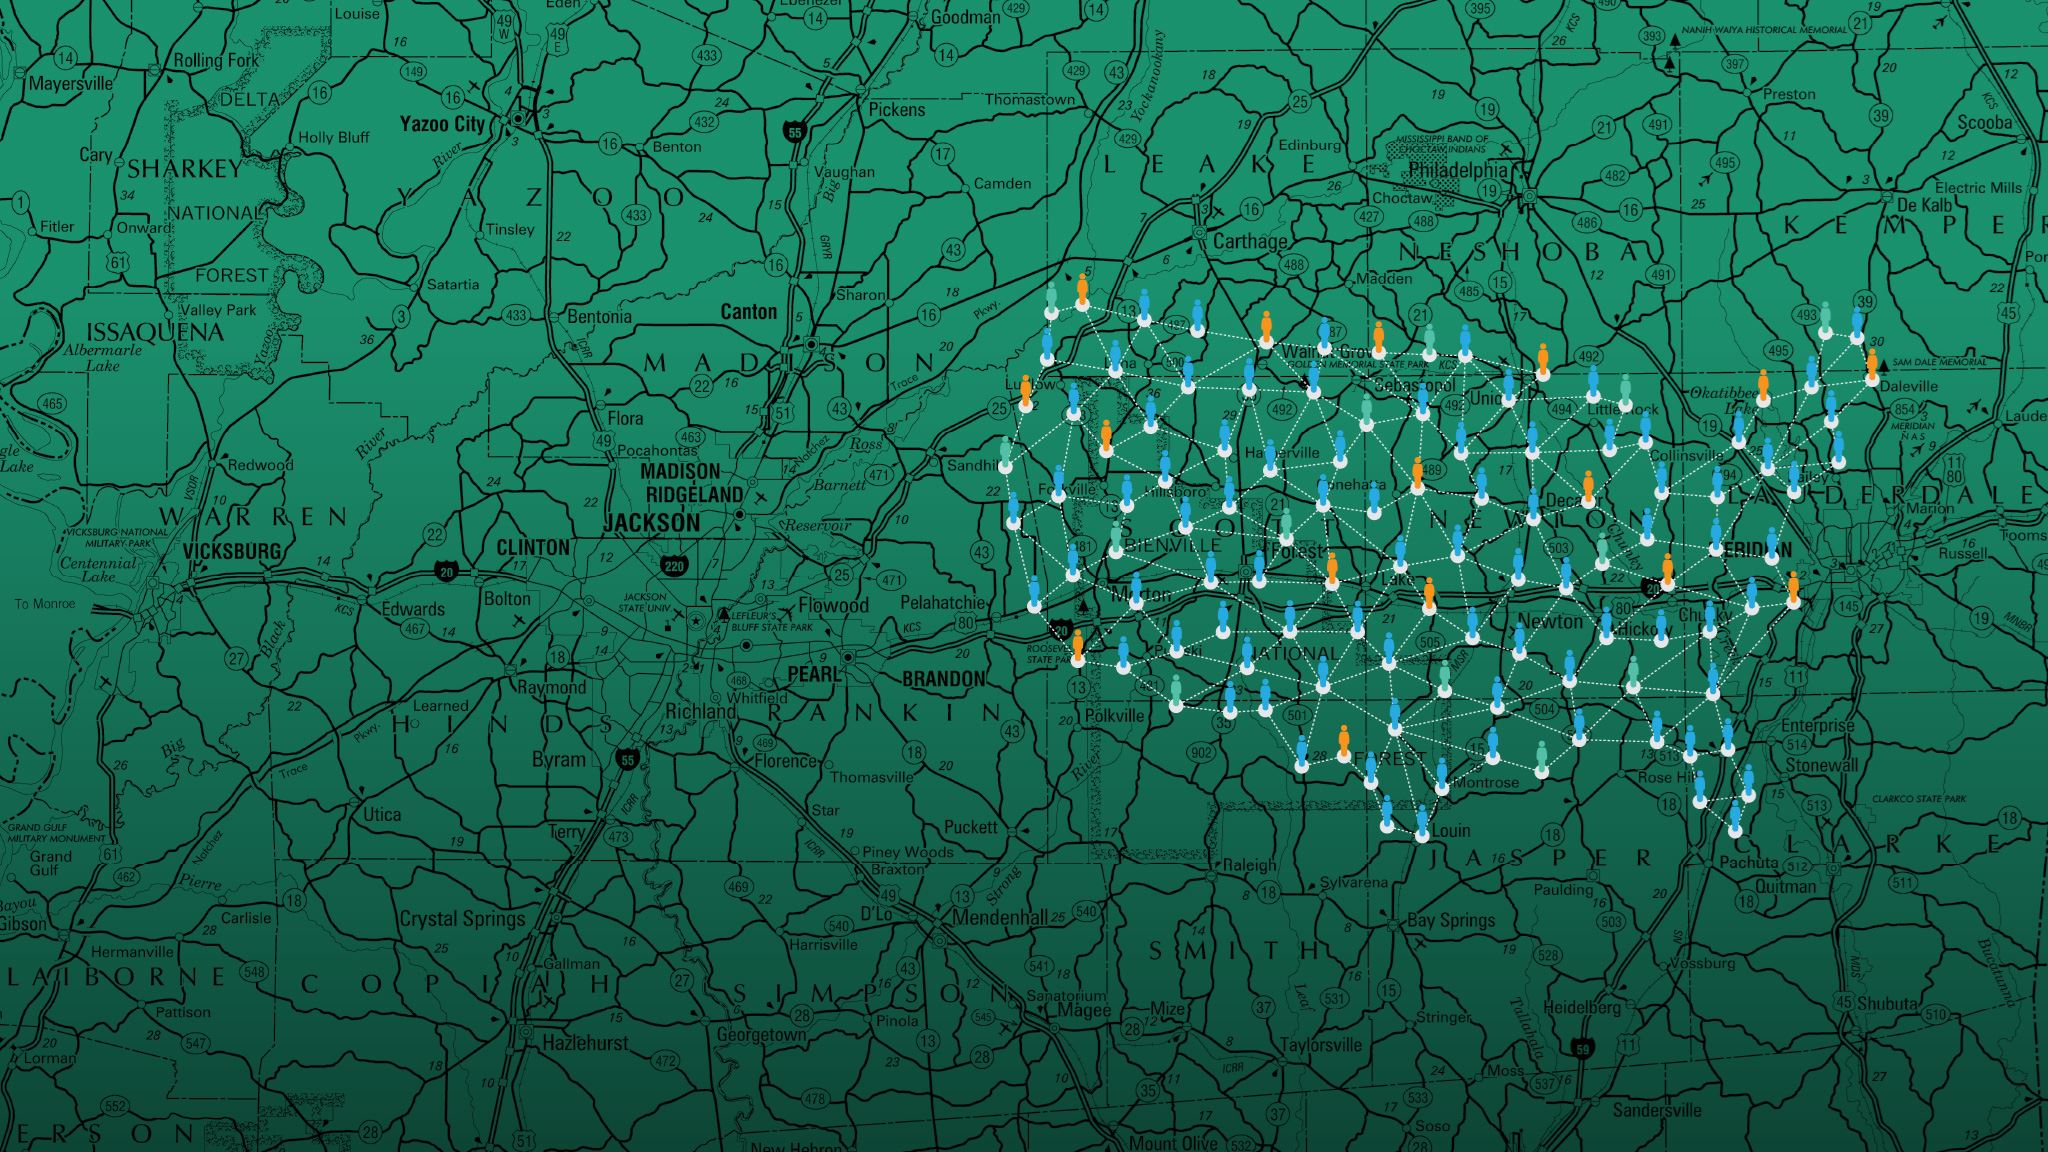 Road map of Mississippi, with a graphic overlay of networked people